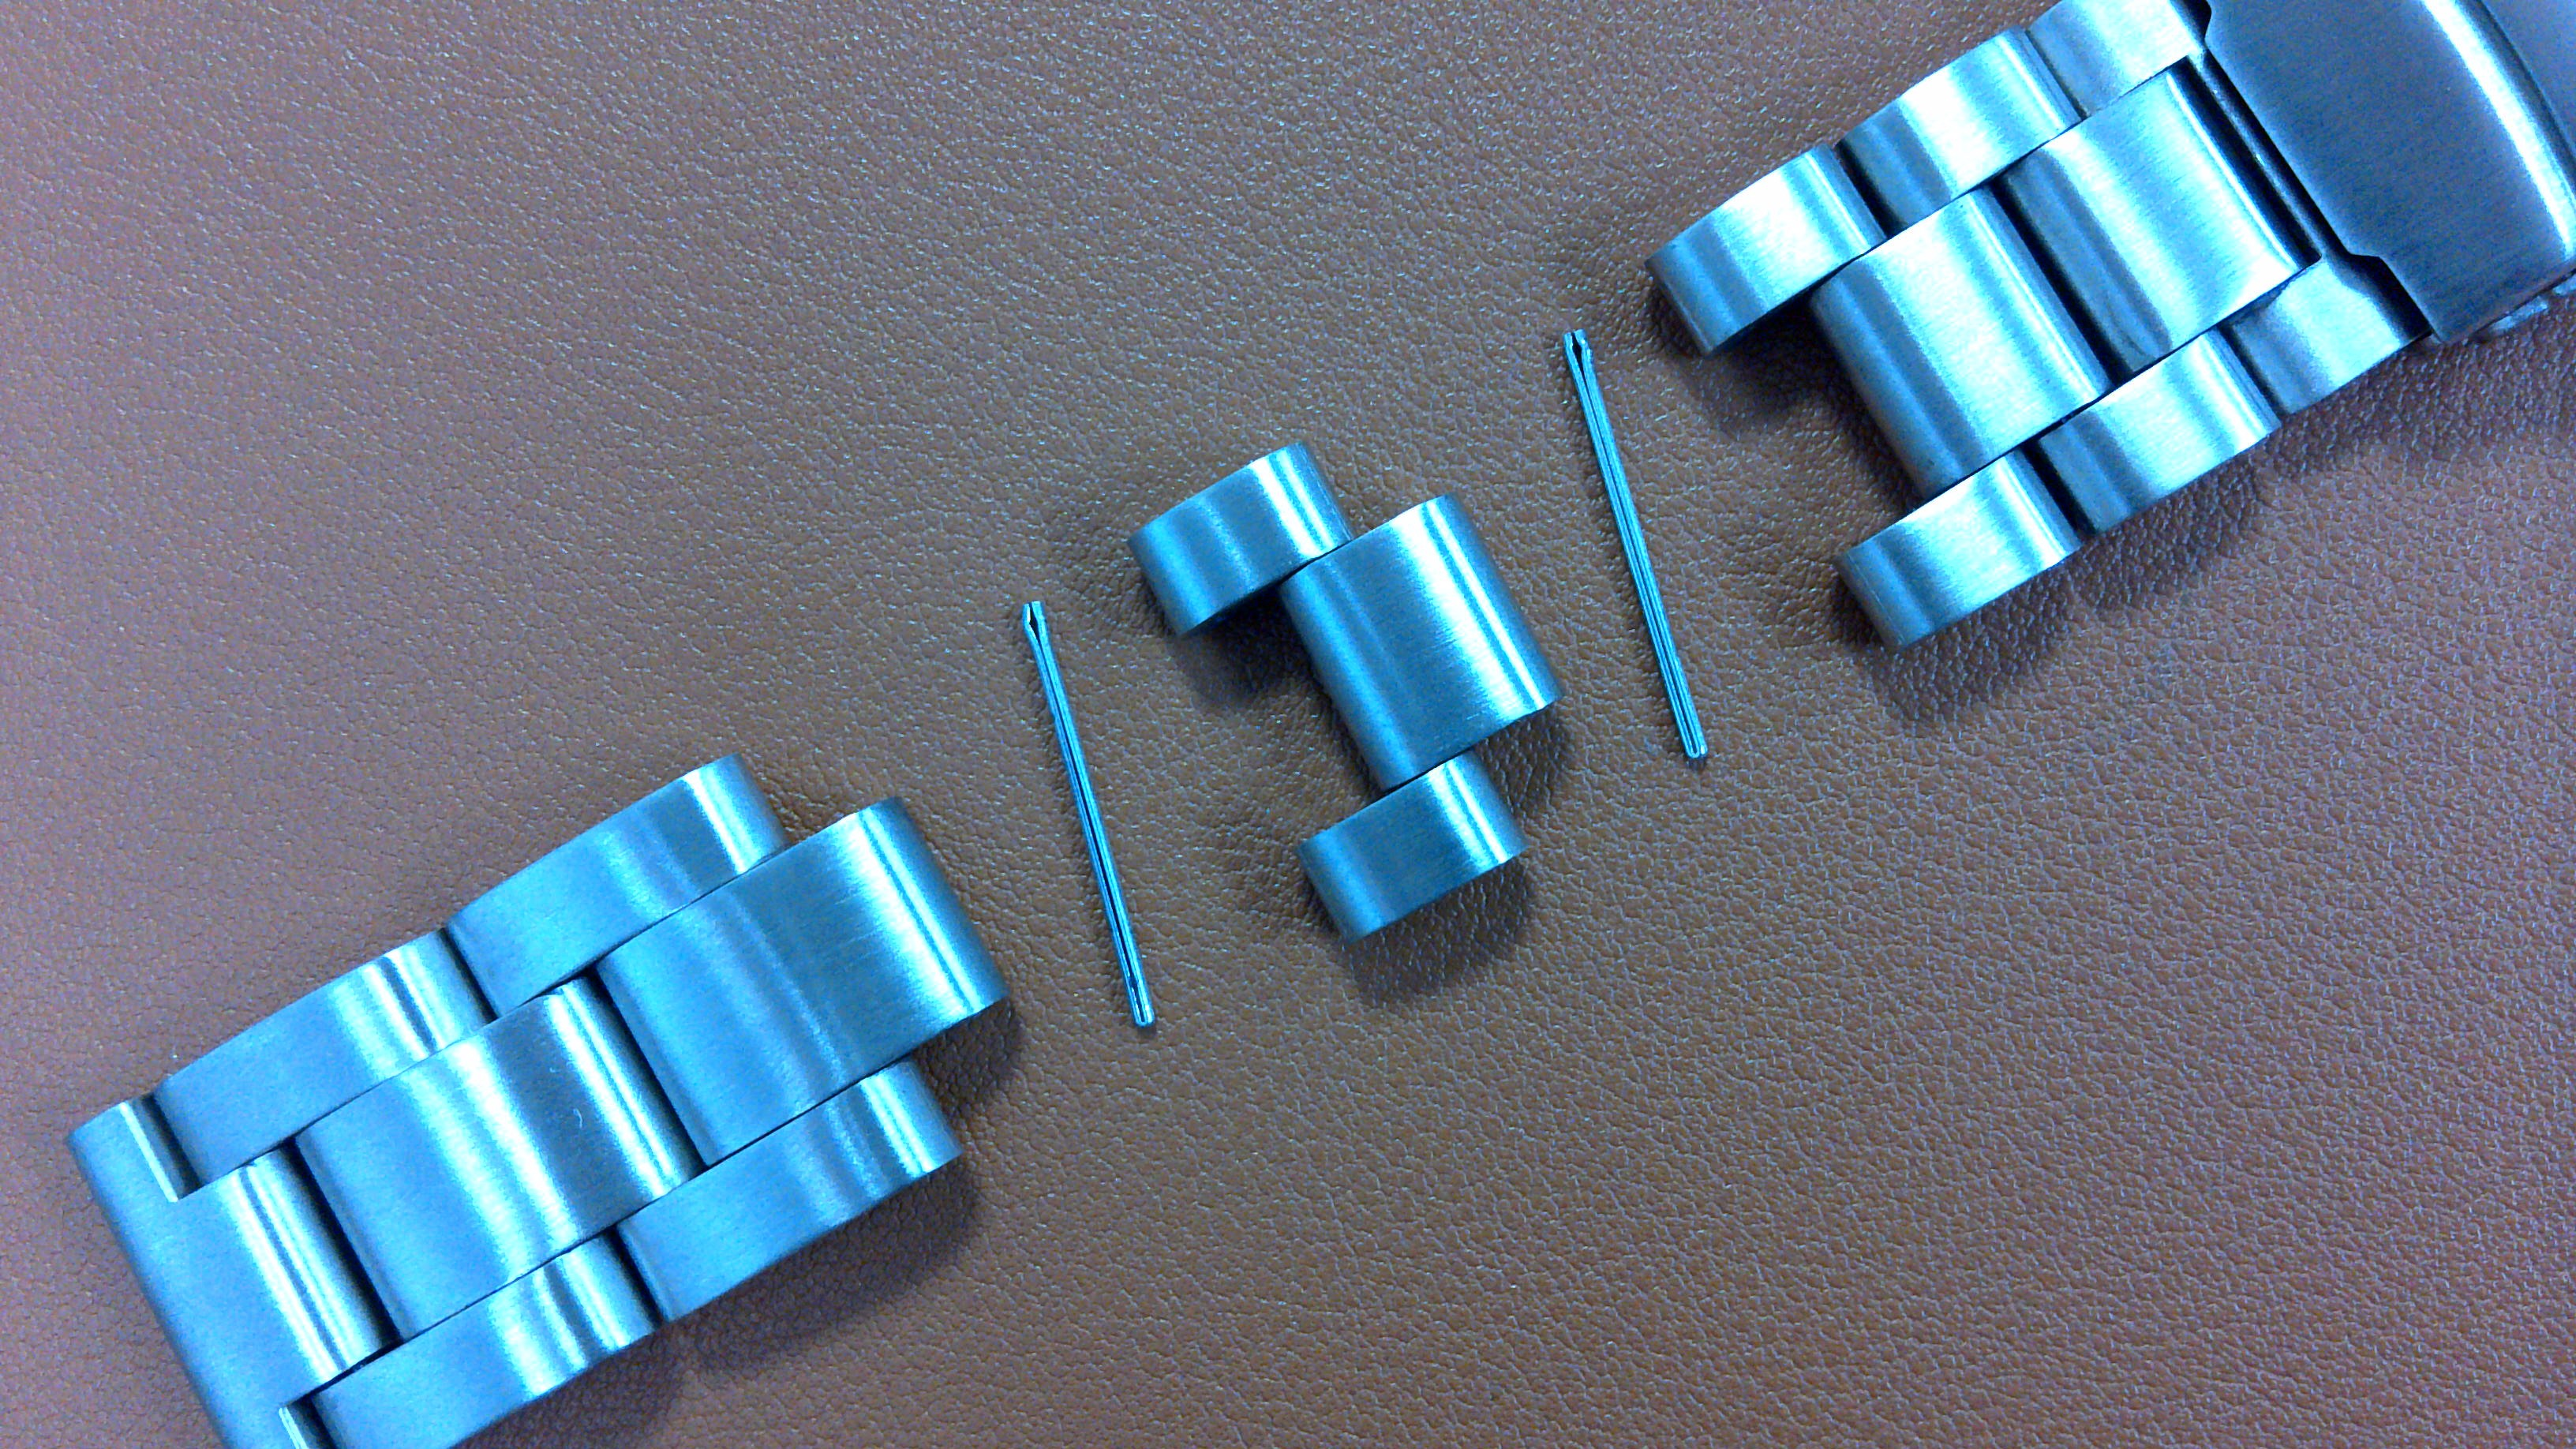 Cotter Pins Removed from the Band